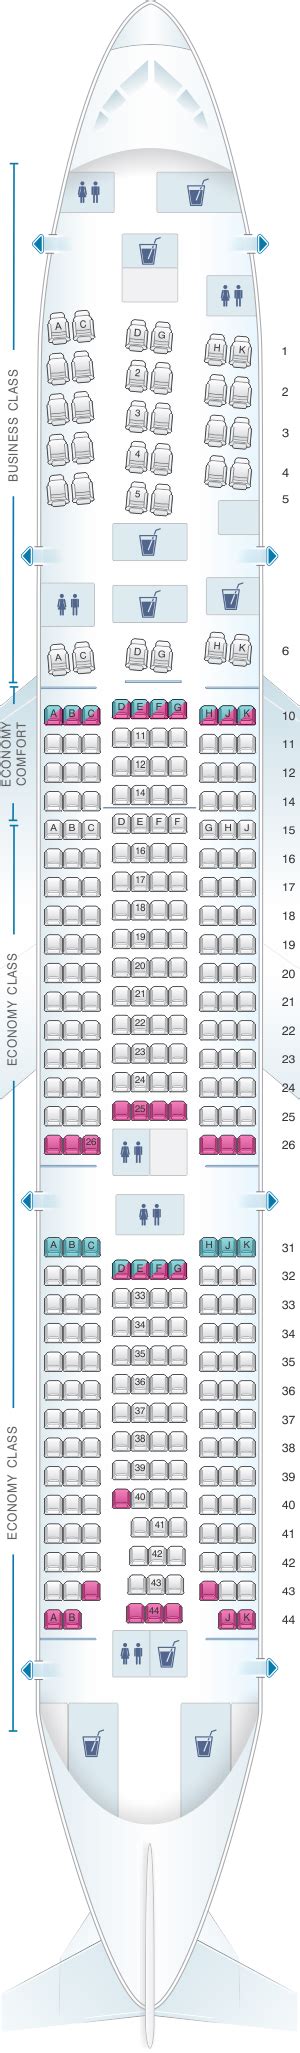 klm boeing 777 200 business class seat map